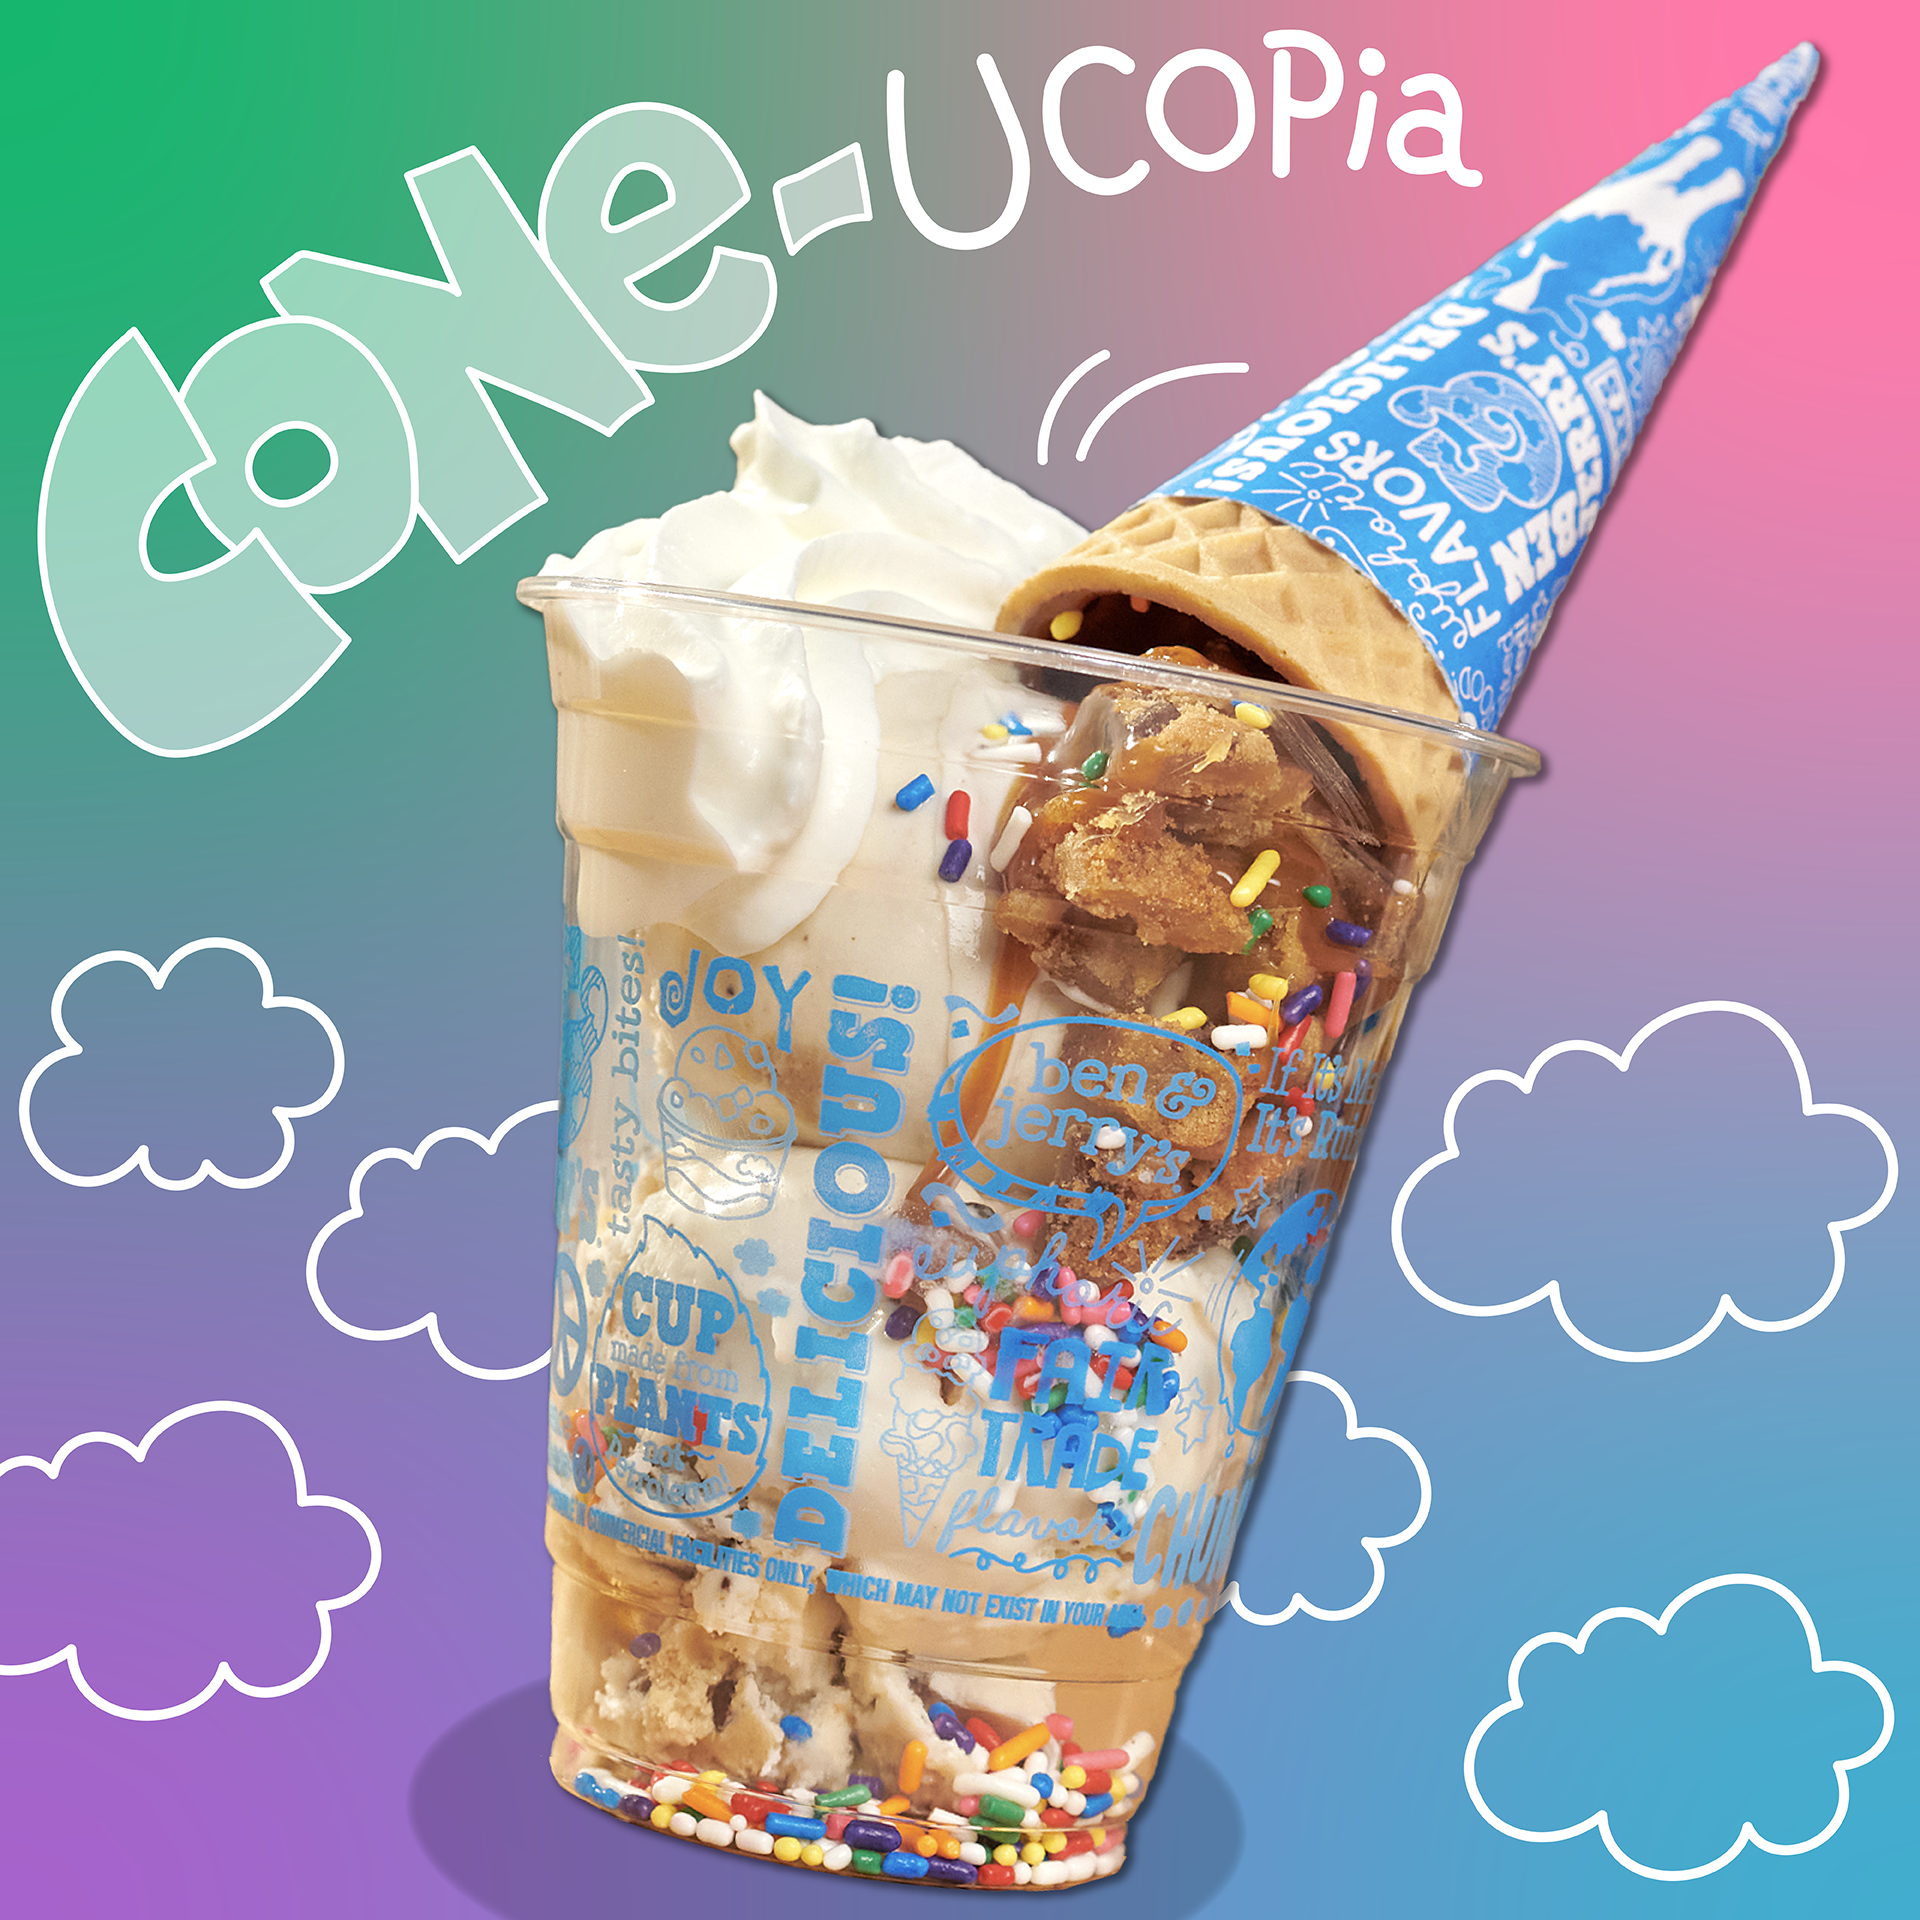 Choose Your CONE Adventure With The Cone-ucopia Sundae